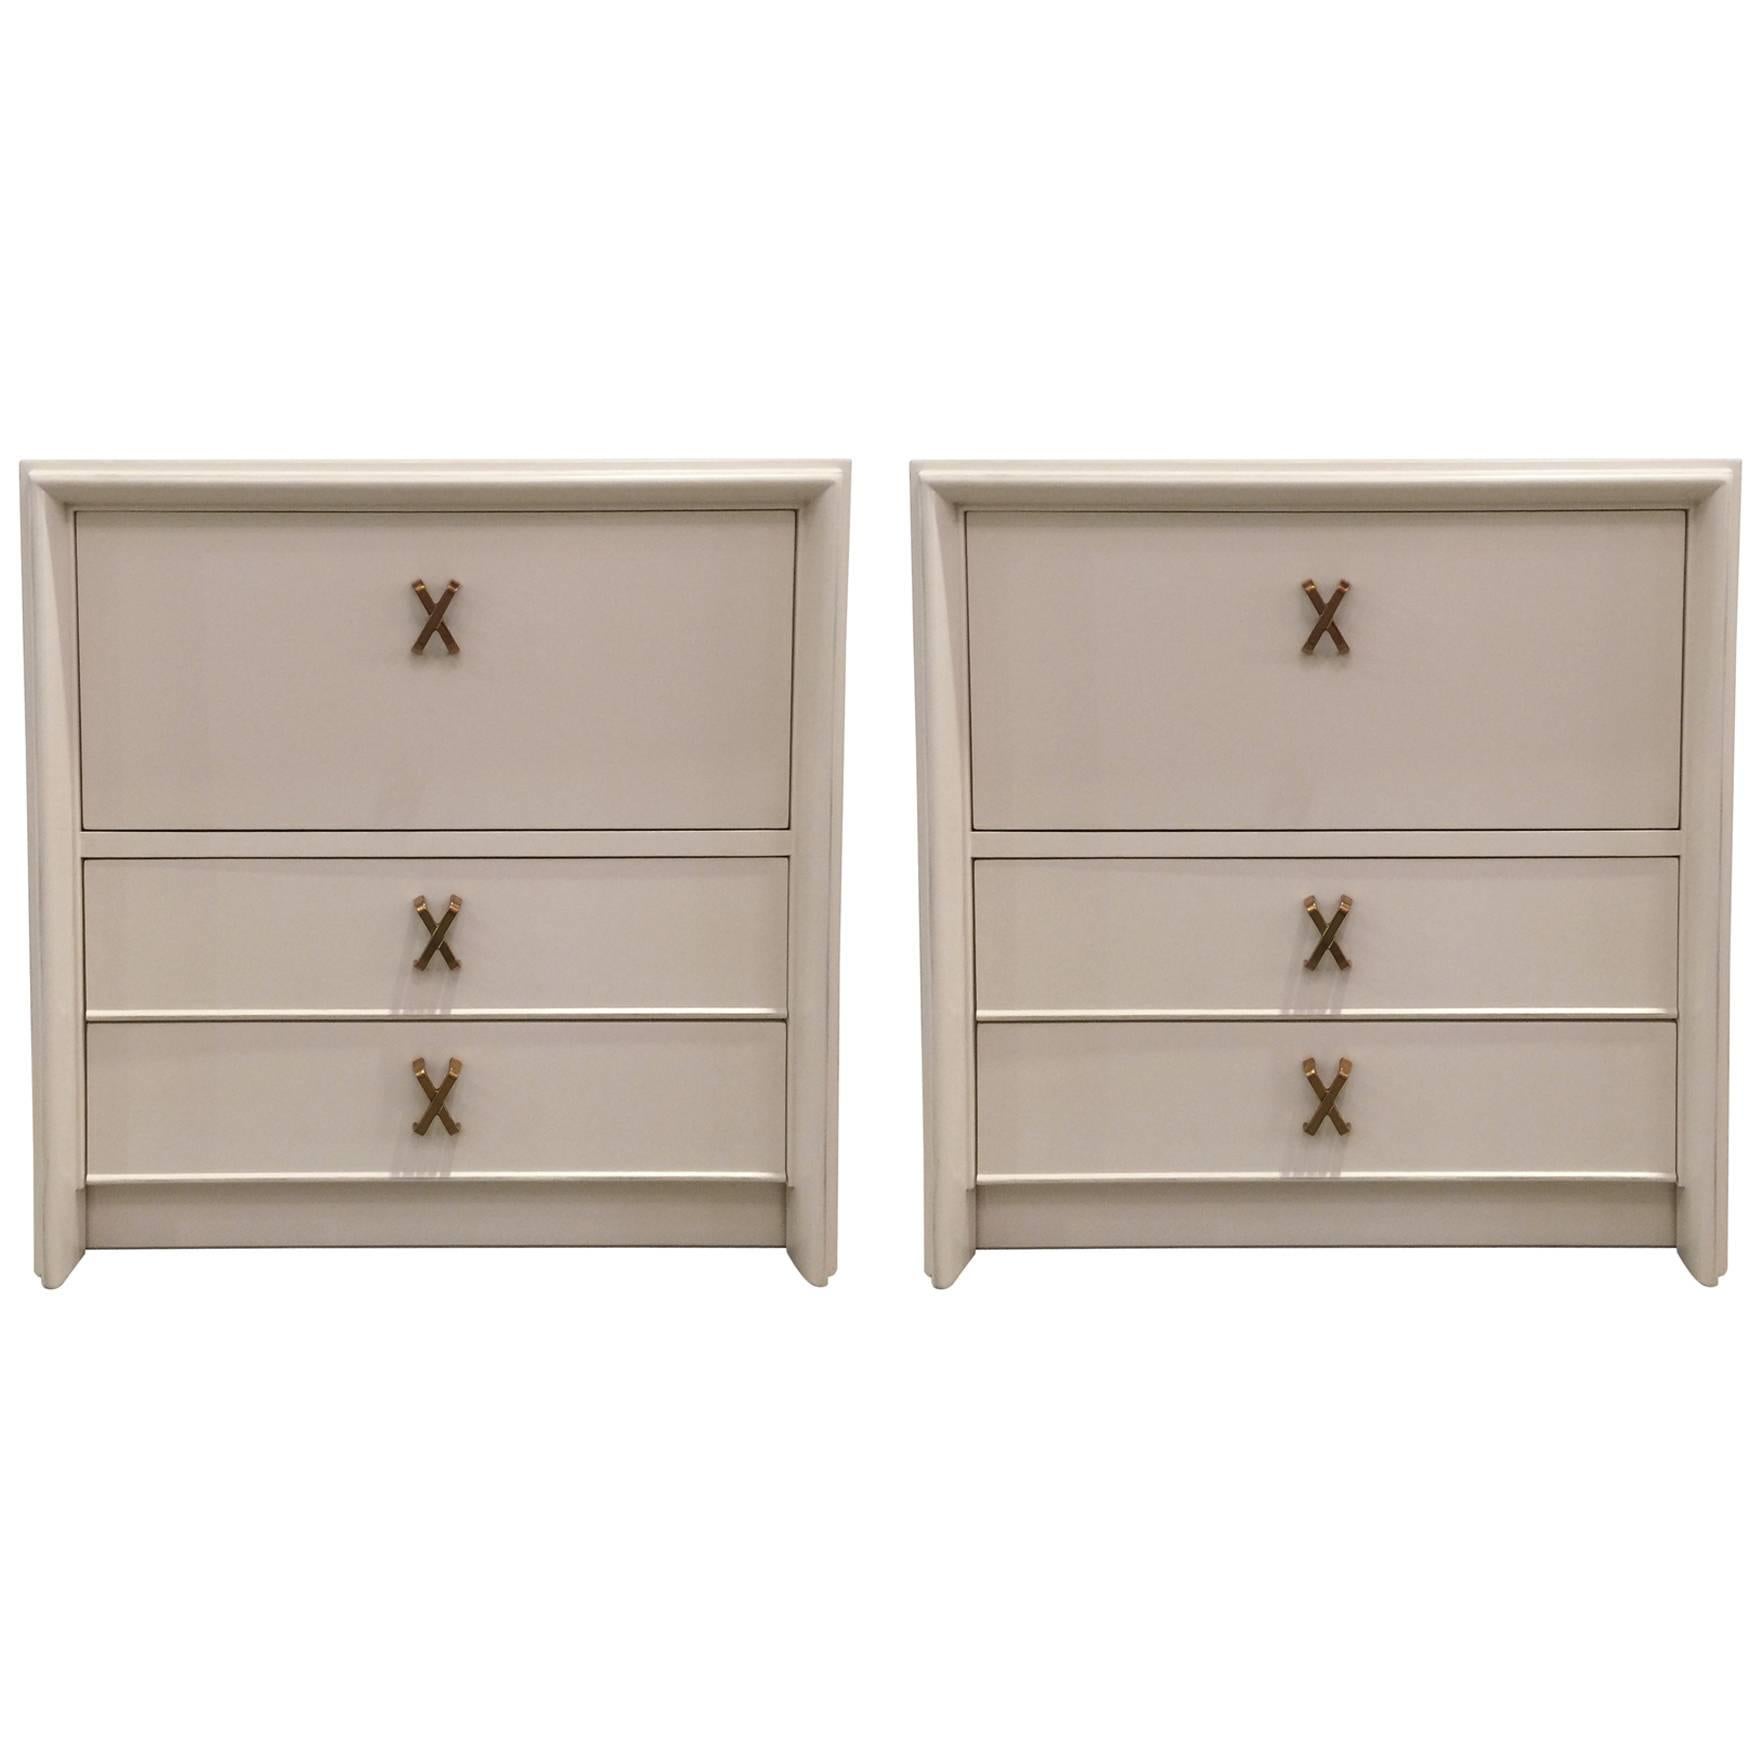 Pair of White Lacquer Nightstands by Paul Frankl